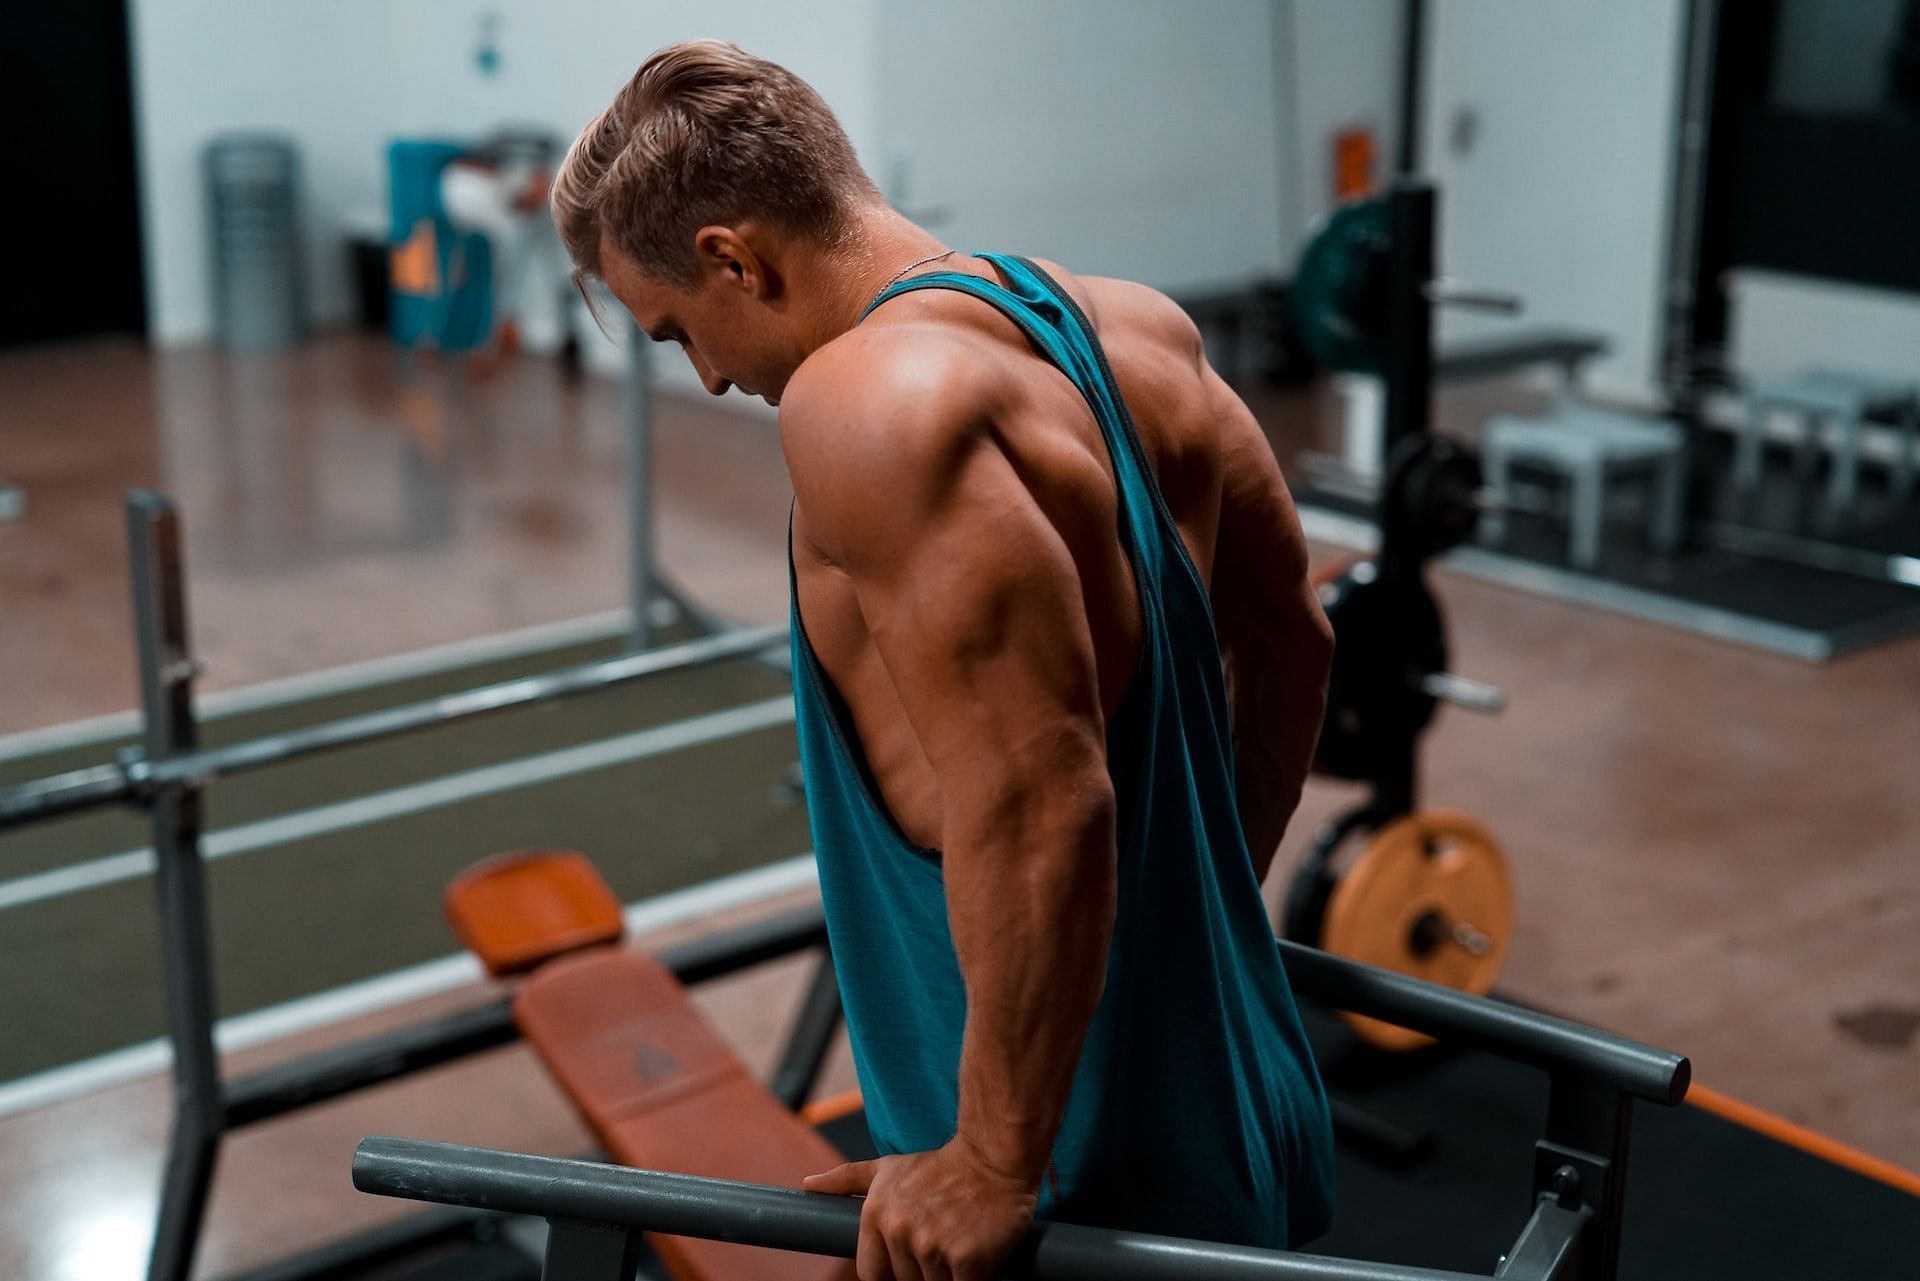 Tricep dips (Photo by John Fornander on Unsplash)